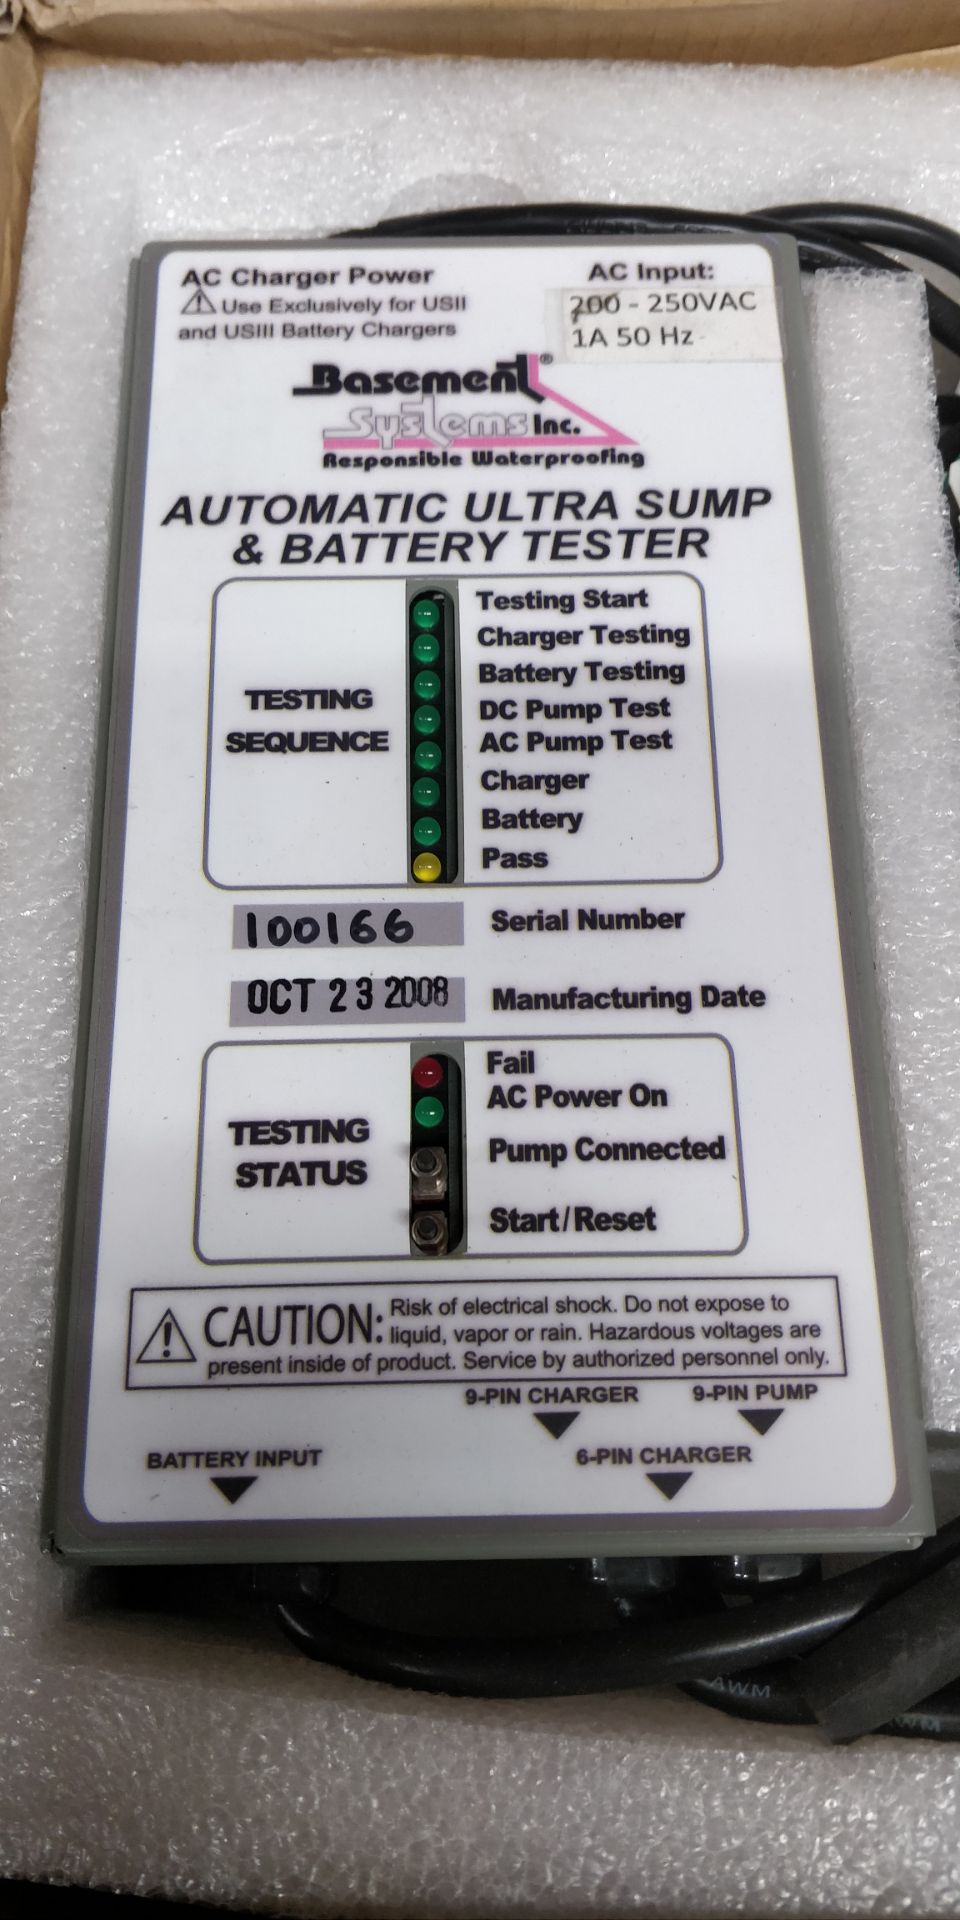 1 x Basement System Automatic Ultra Sump and Battery Tester - Model 92159 - New and Boxed - - Image 2 of 6